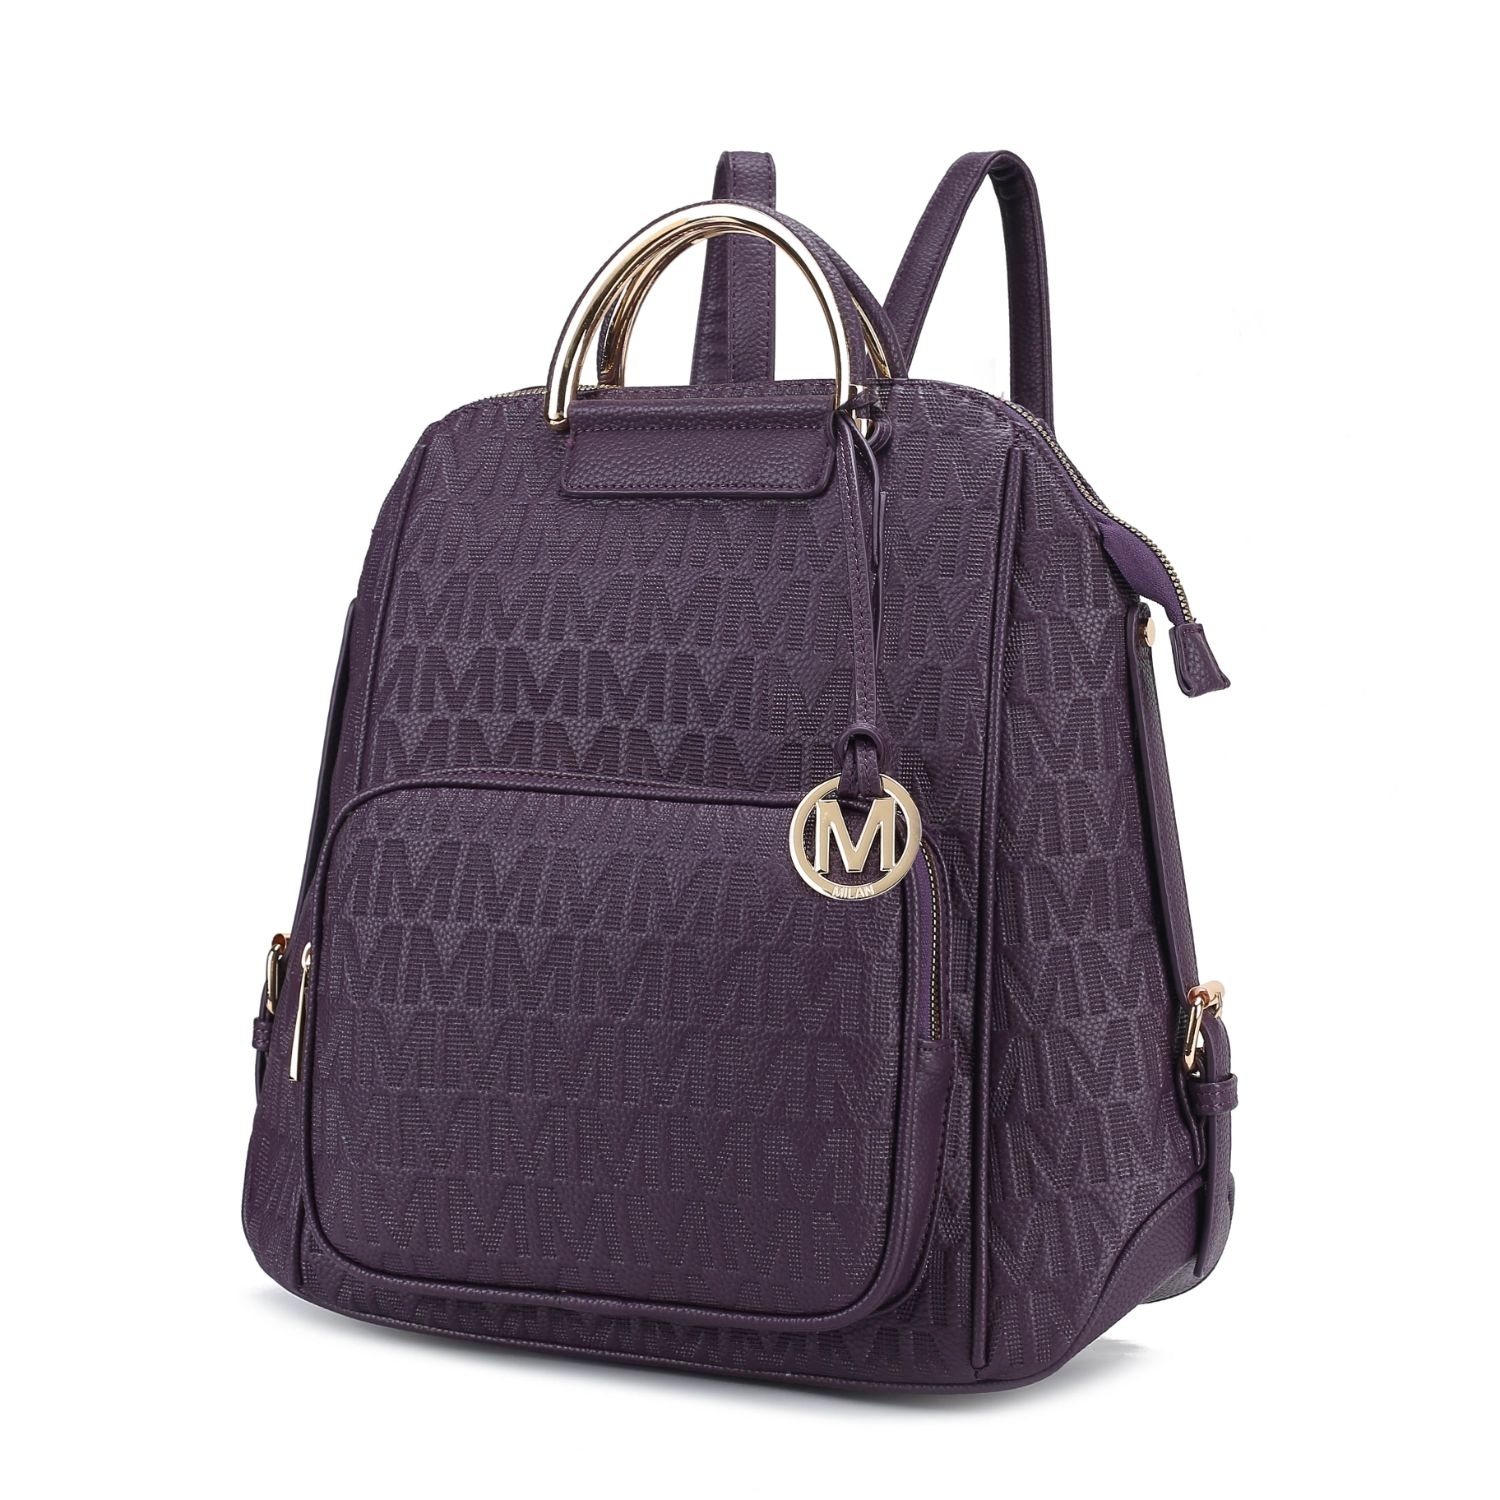 MKF Collection Torra Milan .M. Signature Trendy Backpack By Mia K. - Purple